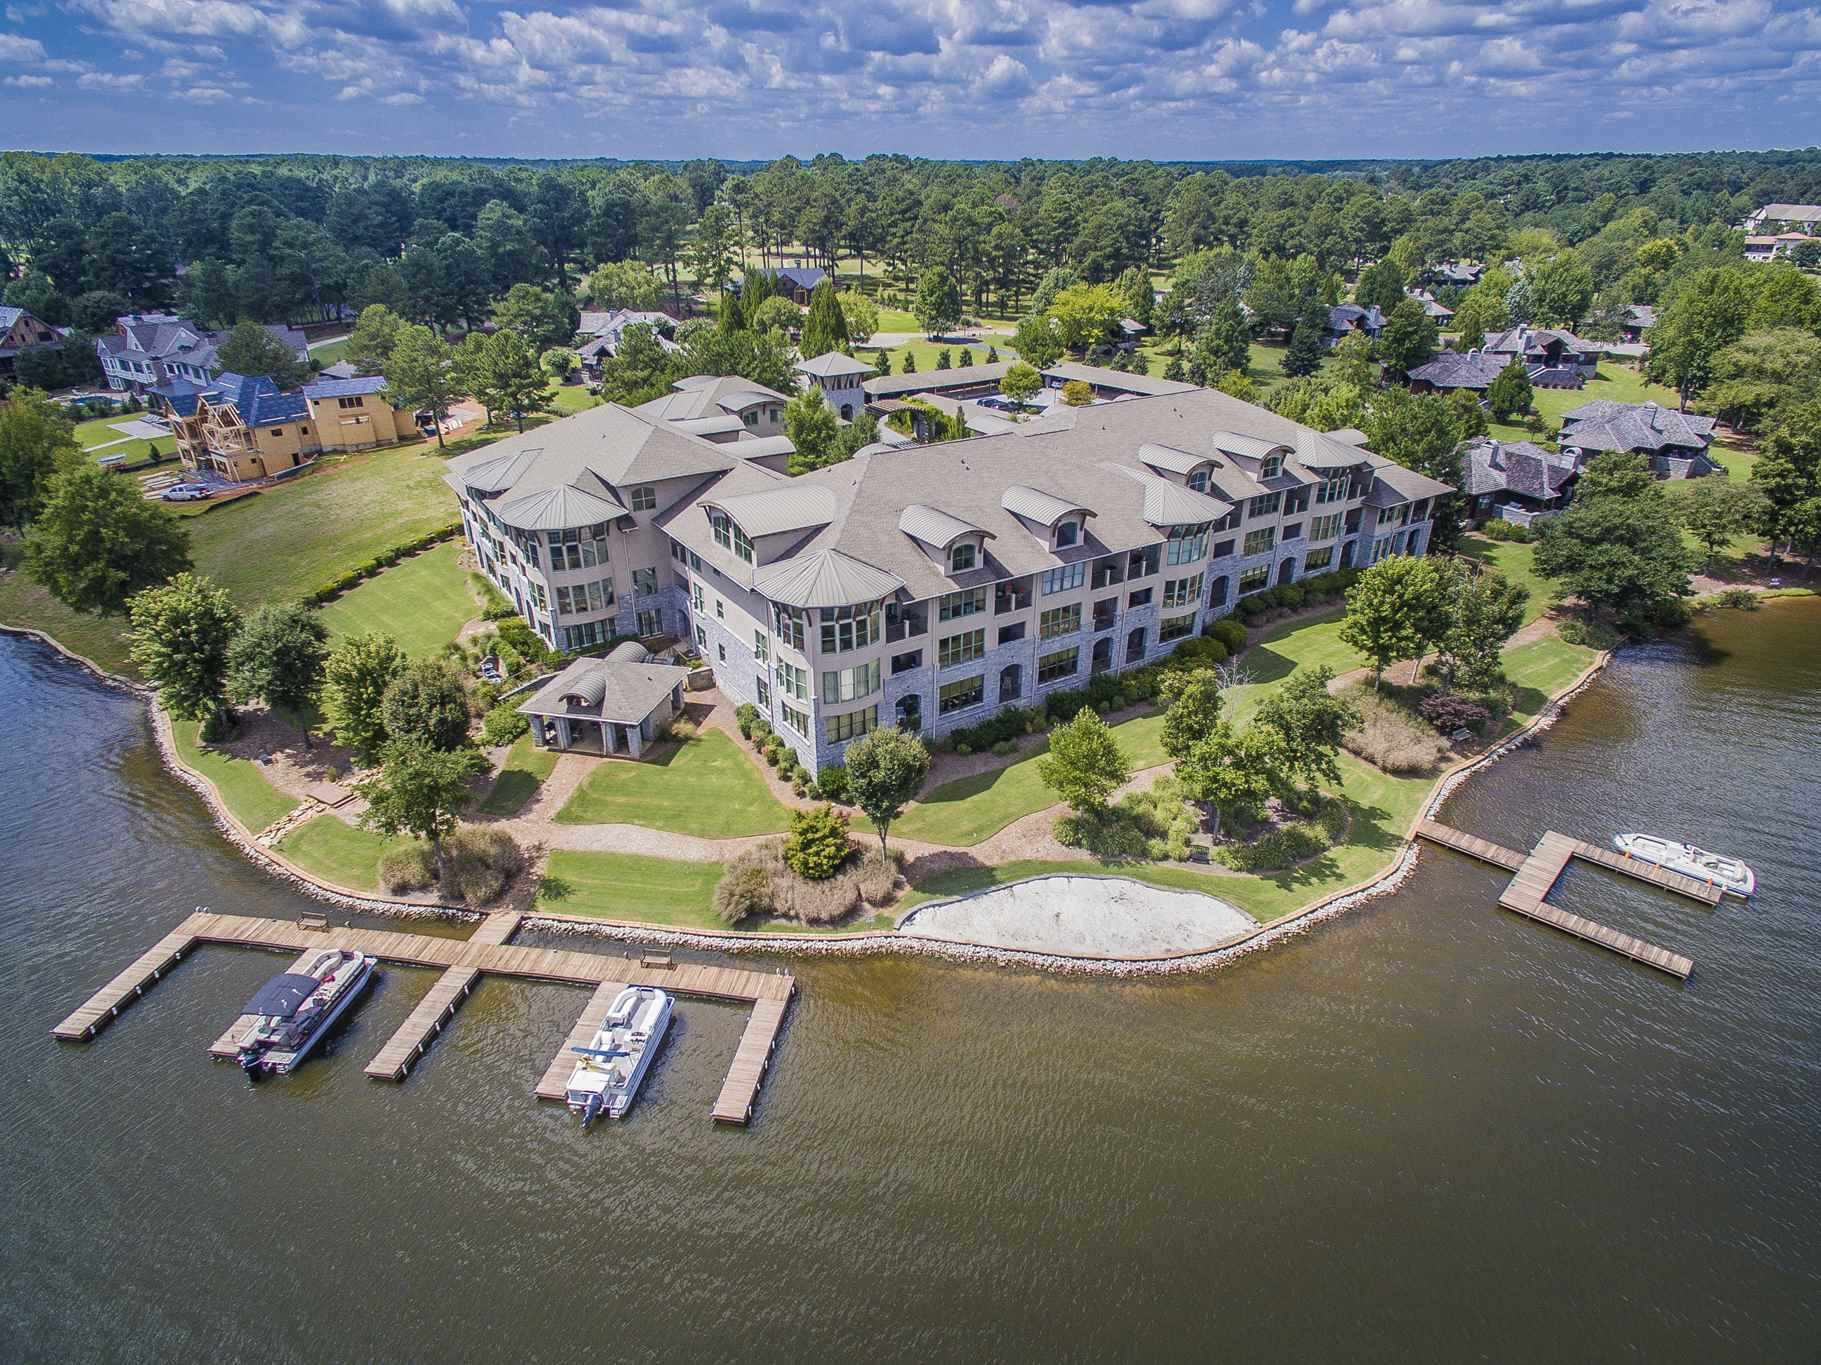 Lakefront Condo in Sojourn at Cuscowilla!  Enjoy the Main Lake and Golf views from your covered Lakeside porch.  This upgraded single level condo has 3 BR / 3 BA with granite counter tops, hardwood floors upgraded crown molding, high ceilings, recessed lighting, and a rustic ship lap accent wall.  The open floor plan flows from the kitchen, through the living room and to the Lake.  The master bedroom has a main Lake view, tiled baths with a separate shower and a walk-in closet.  There are 2 additional bedrooms and baths and a covered Lakeside porch with an upgraded see-through railing. Owners enjoy covered parking, a lakeside pavilion with boat docks, grills, and a restroom.  There is golf cart parking available and its only a short ride to the Clubhouse, swimming pool and Golf Course.  The furniture and a full Cuscowilla Golf Membership are available.  2022 Cuscowilla Master POA - $2,600 2022 Sojourn POA - $440.49 per month